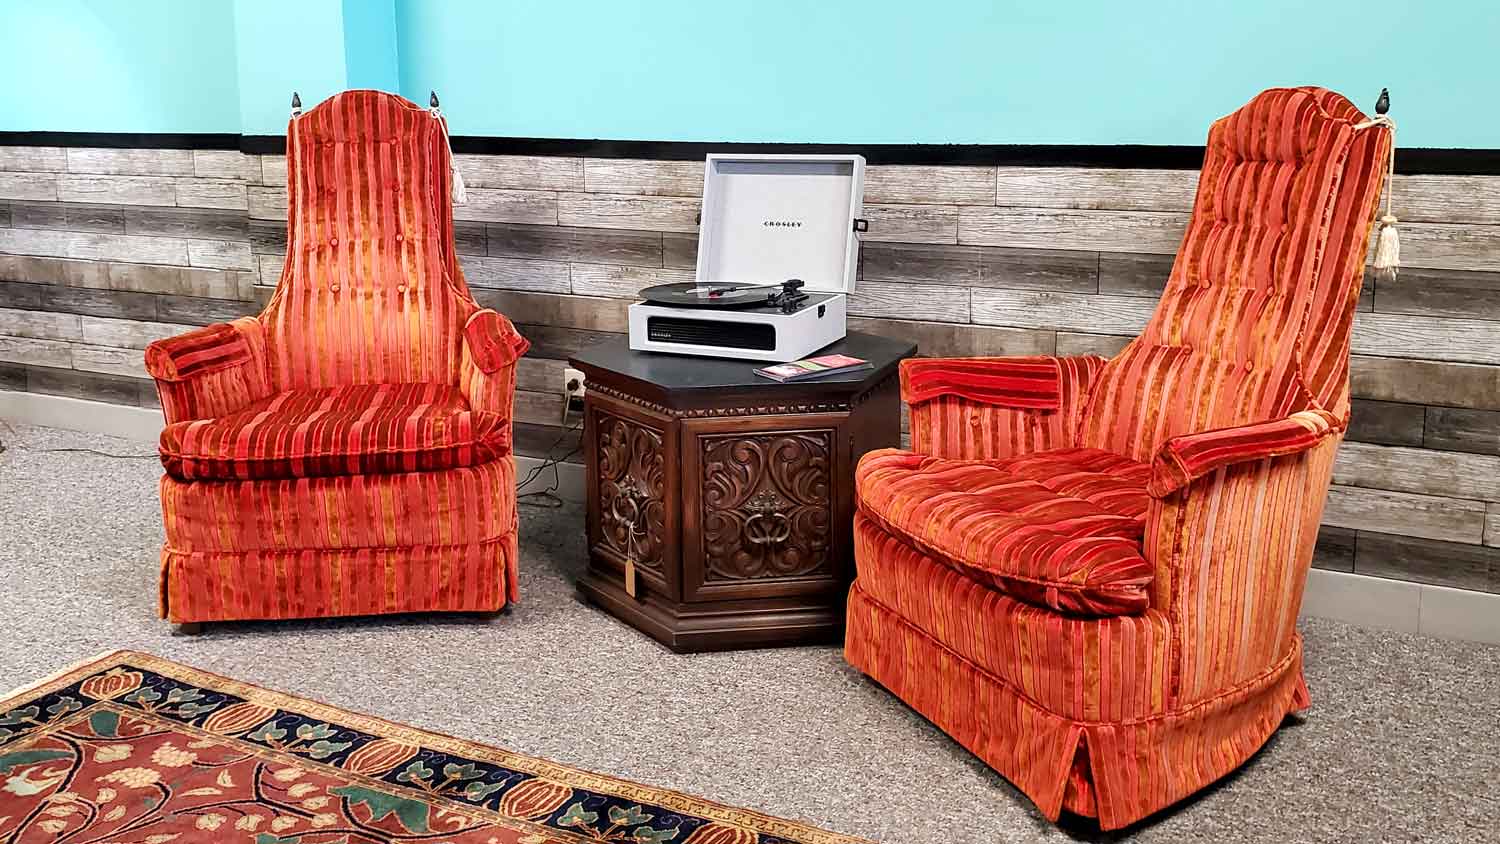 Vintage chairs, end table, and record player.